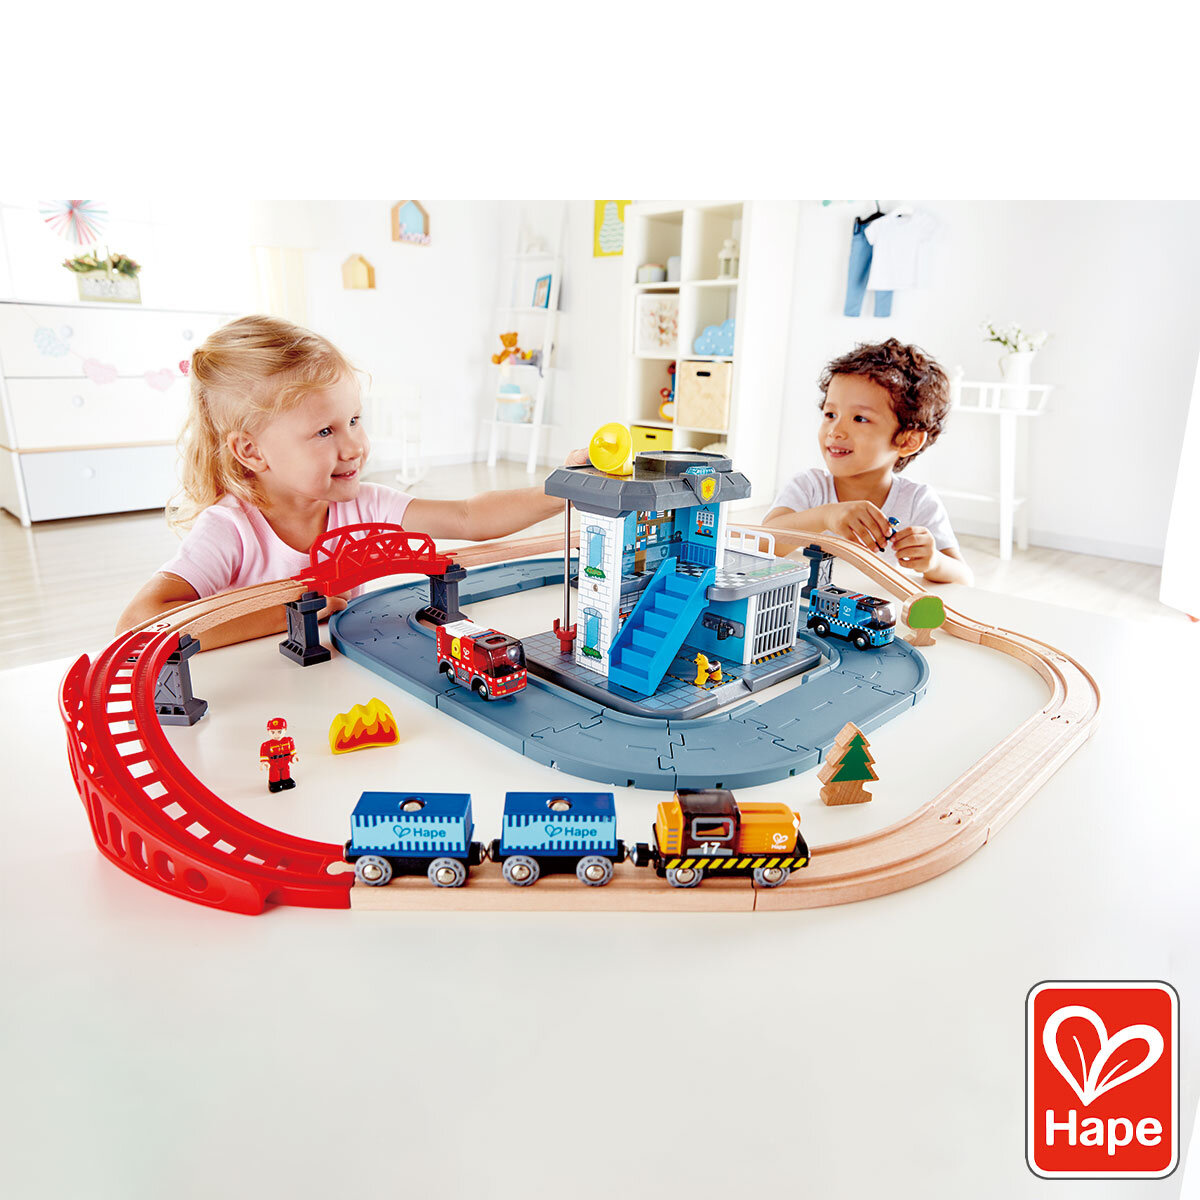 Buy Hape Emergency Services HQ Lifestyle Image at Costco.co.uk